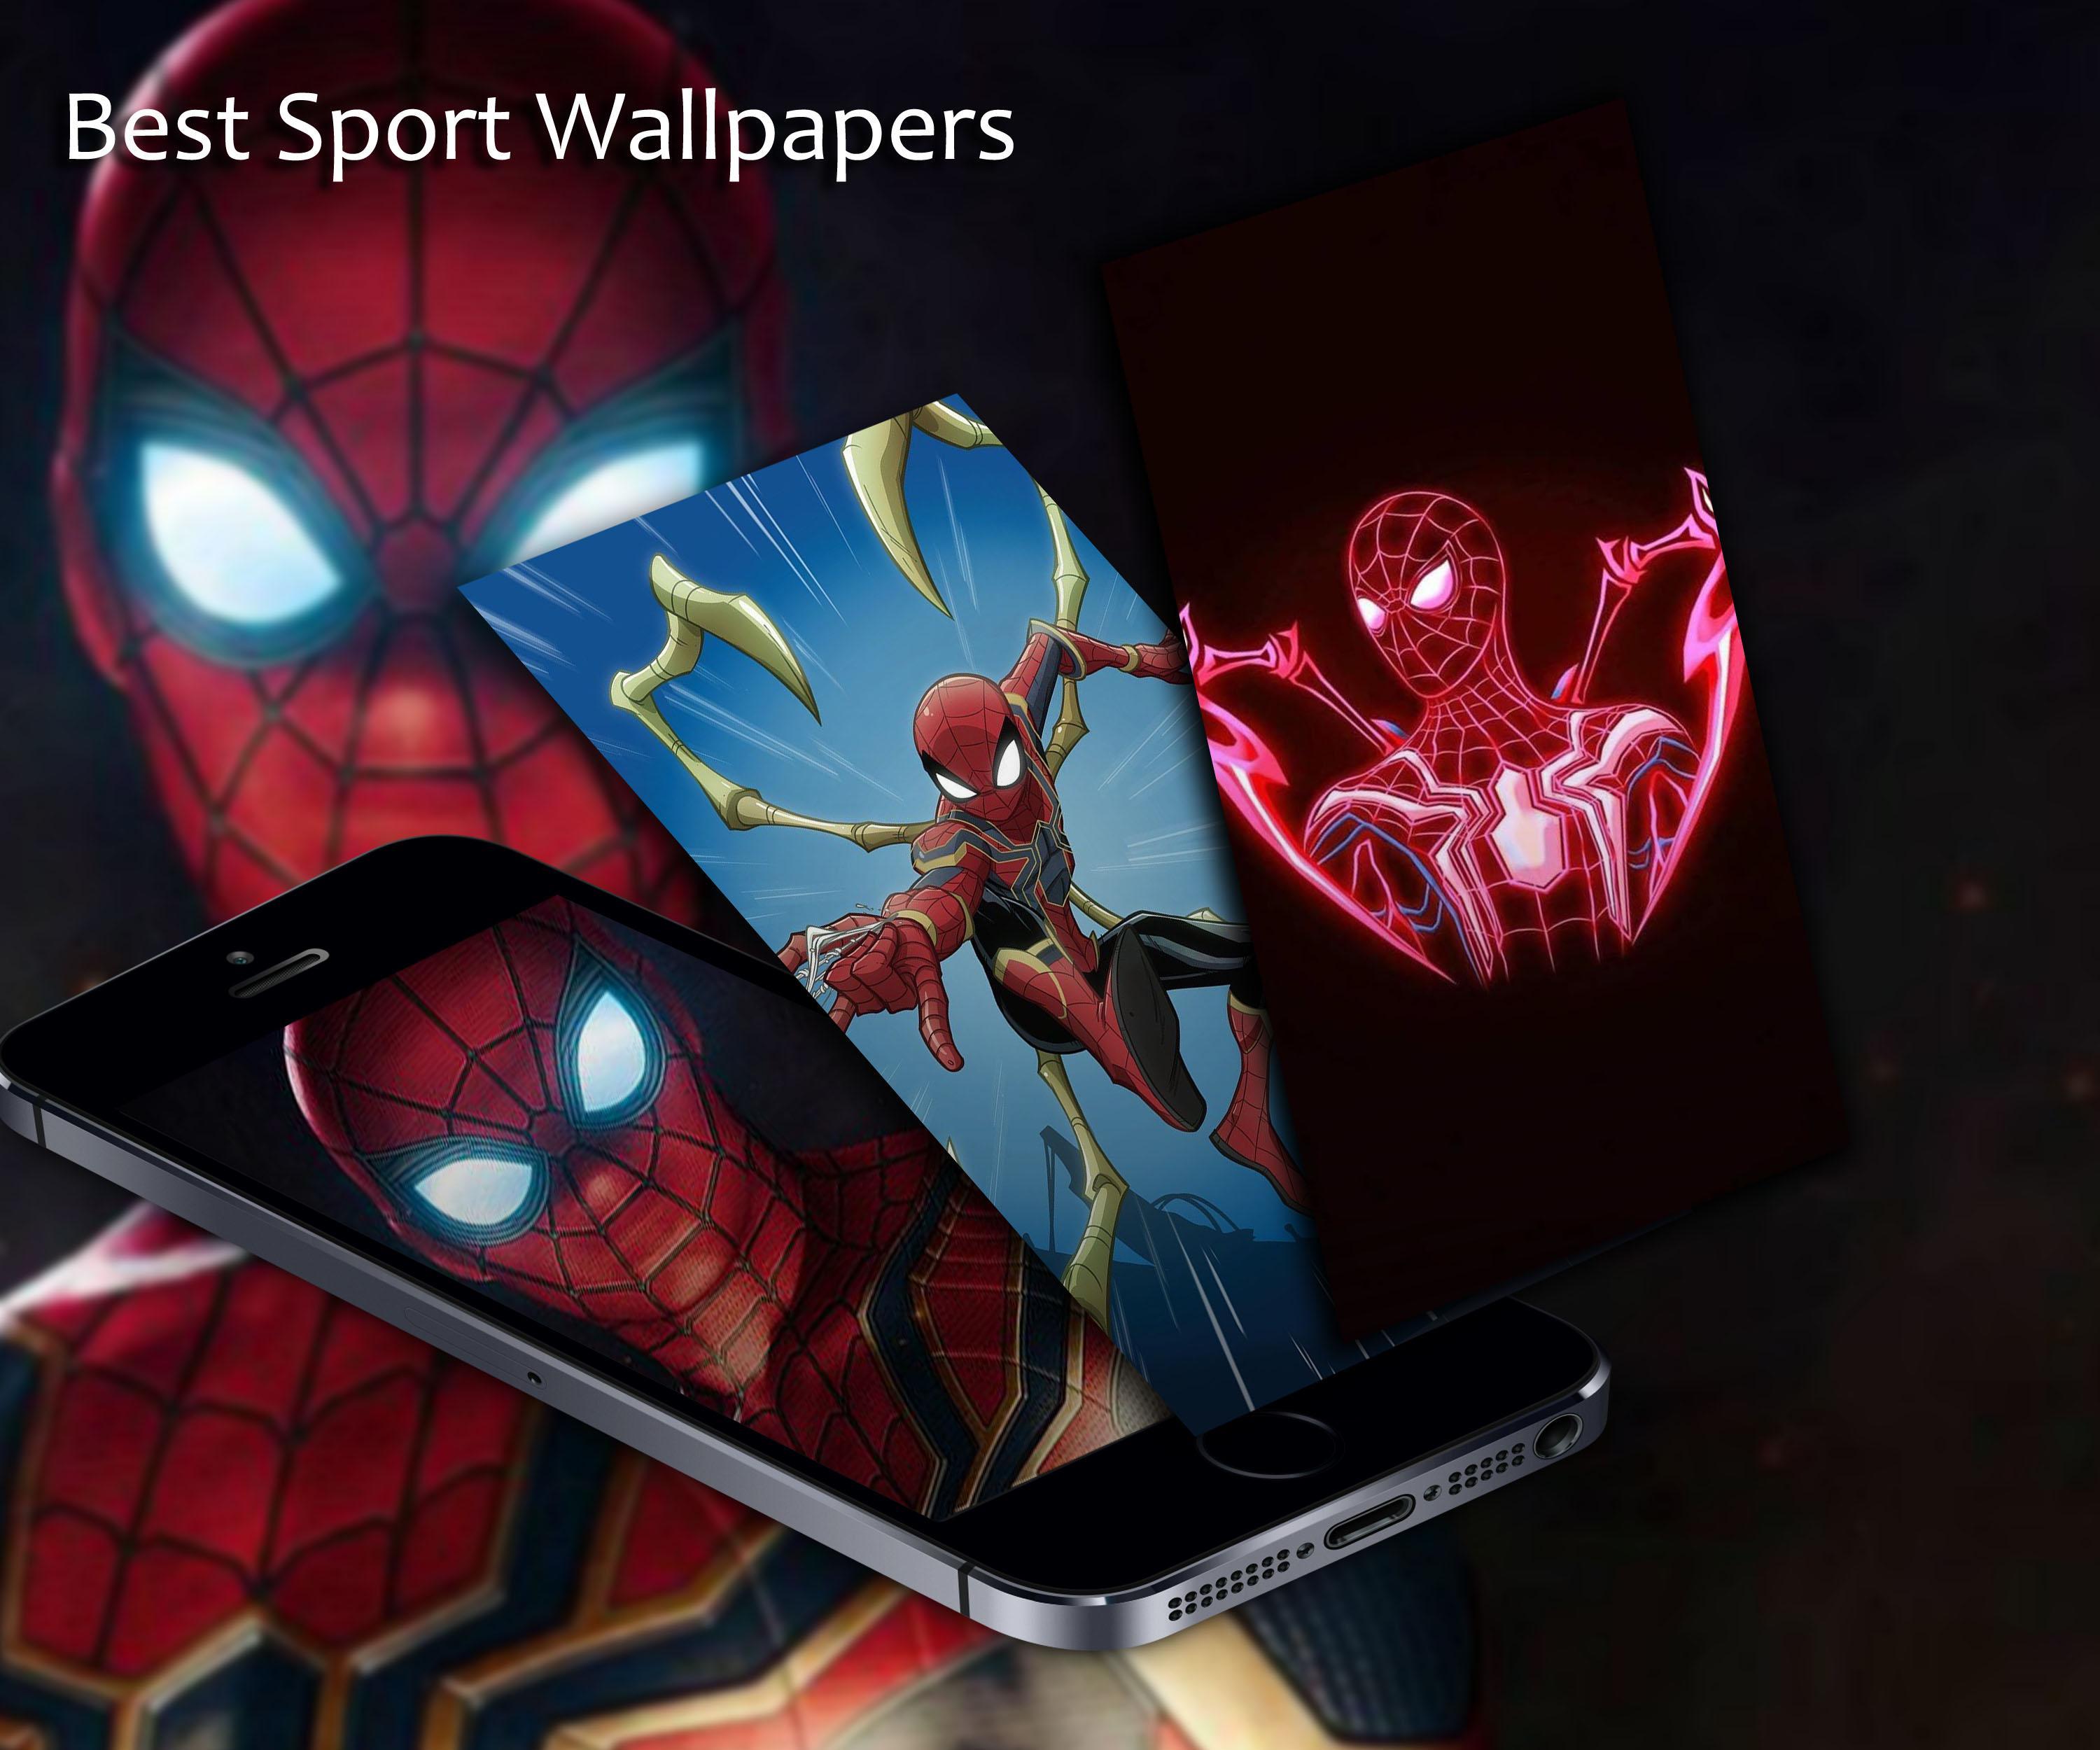 Iron Spider wallpaper HD for Android